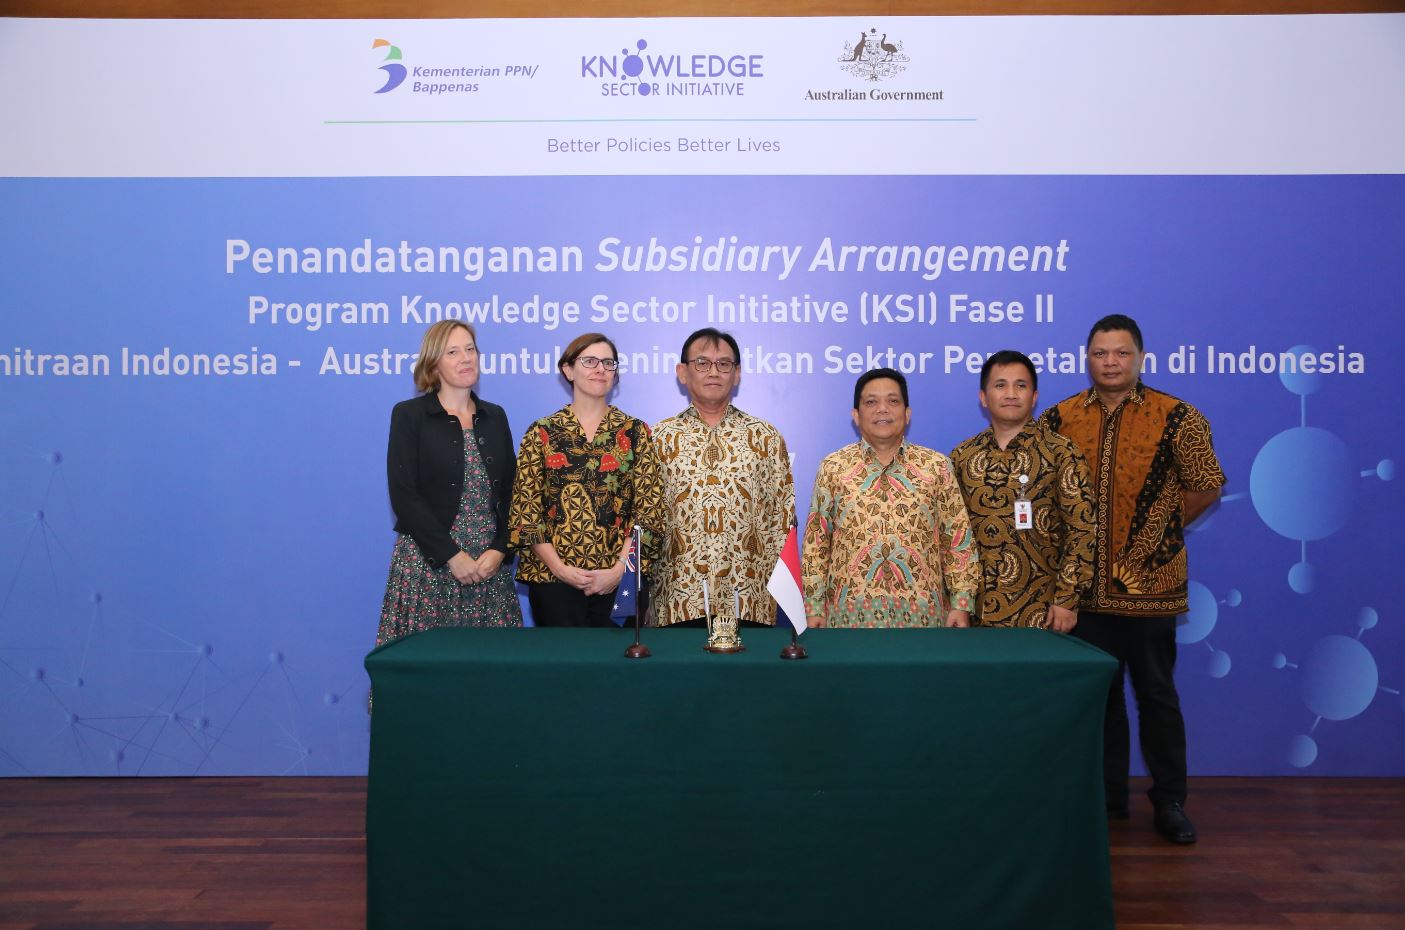 Indonesia and Australia Continue Cooperation to Improve Knowledge Sector